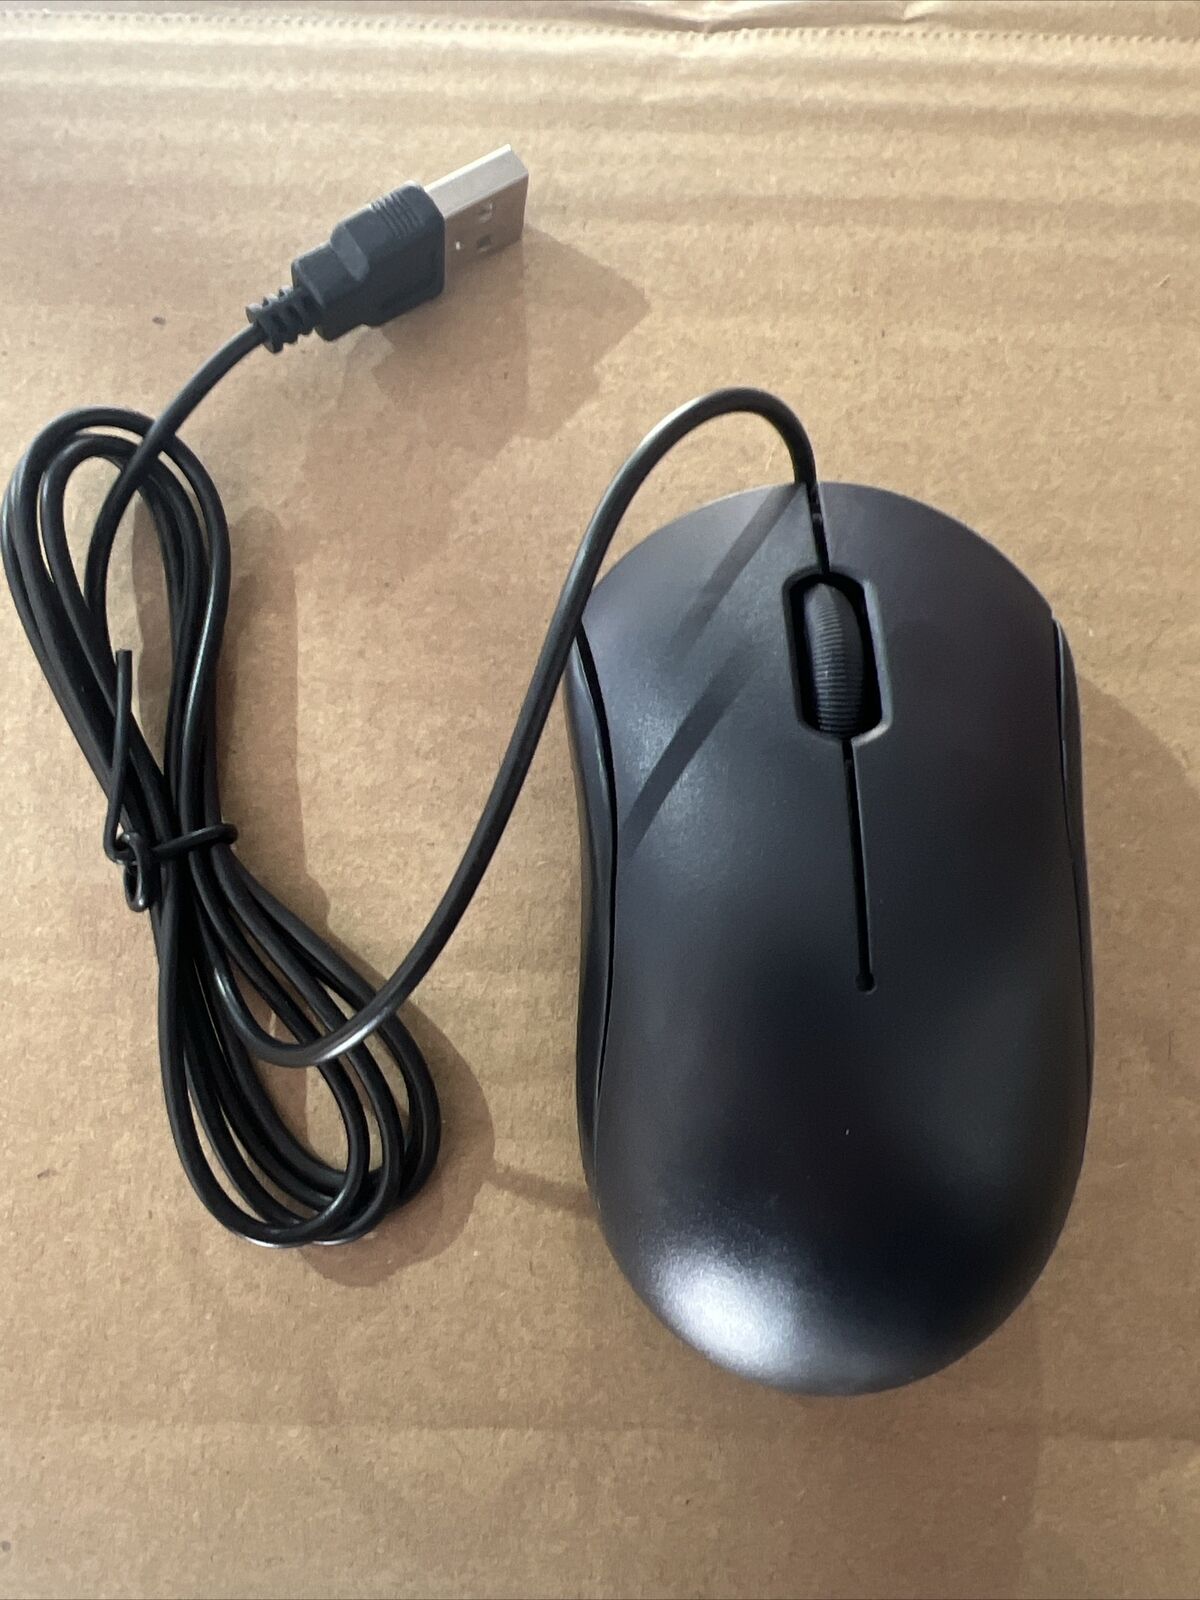 Lot Of 6 USB Wired Mouse Generic Black Lap Desktop Computer 